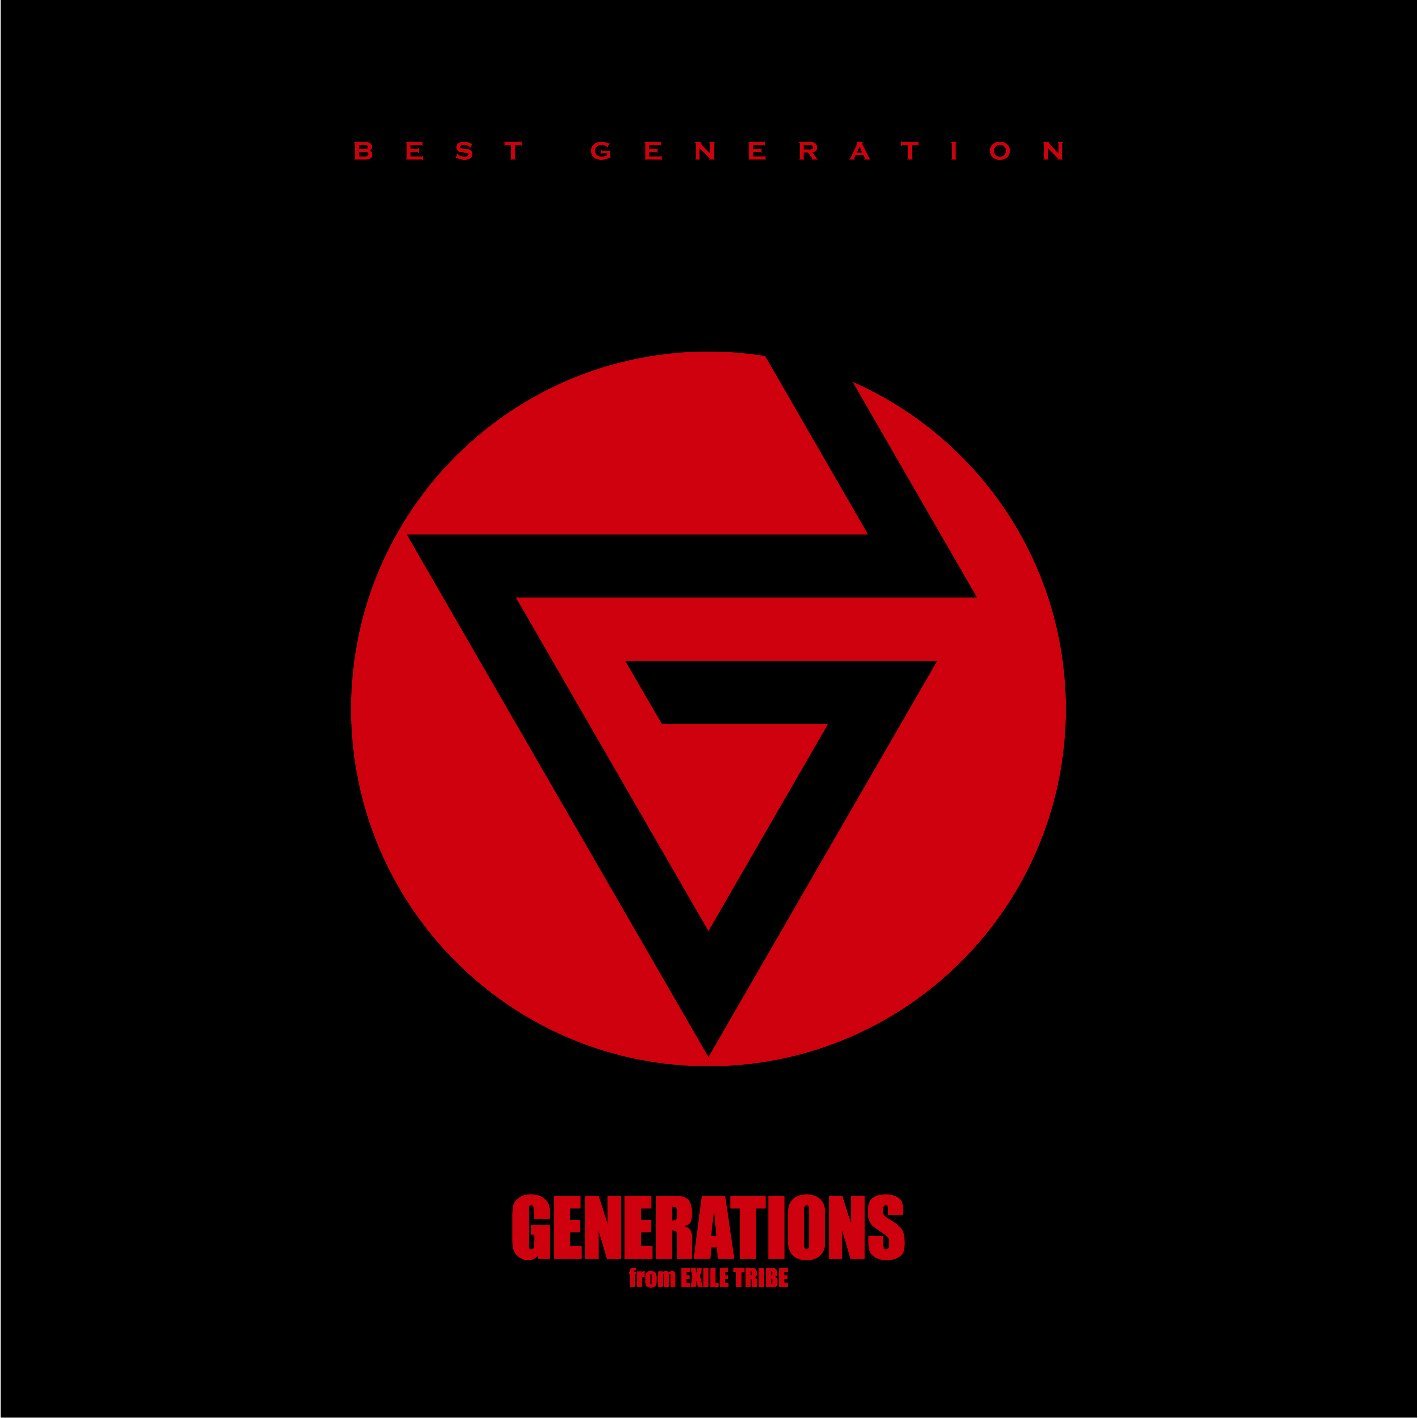 Generations From Exile Tribe I Believe 歌詞 Pv